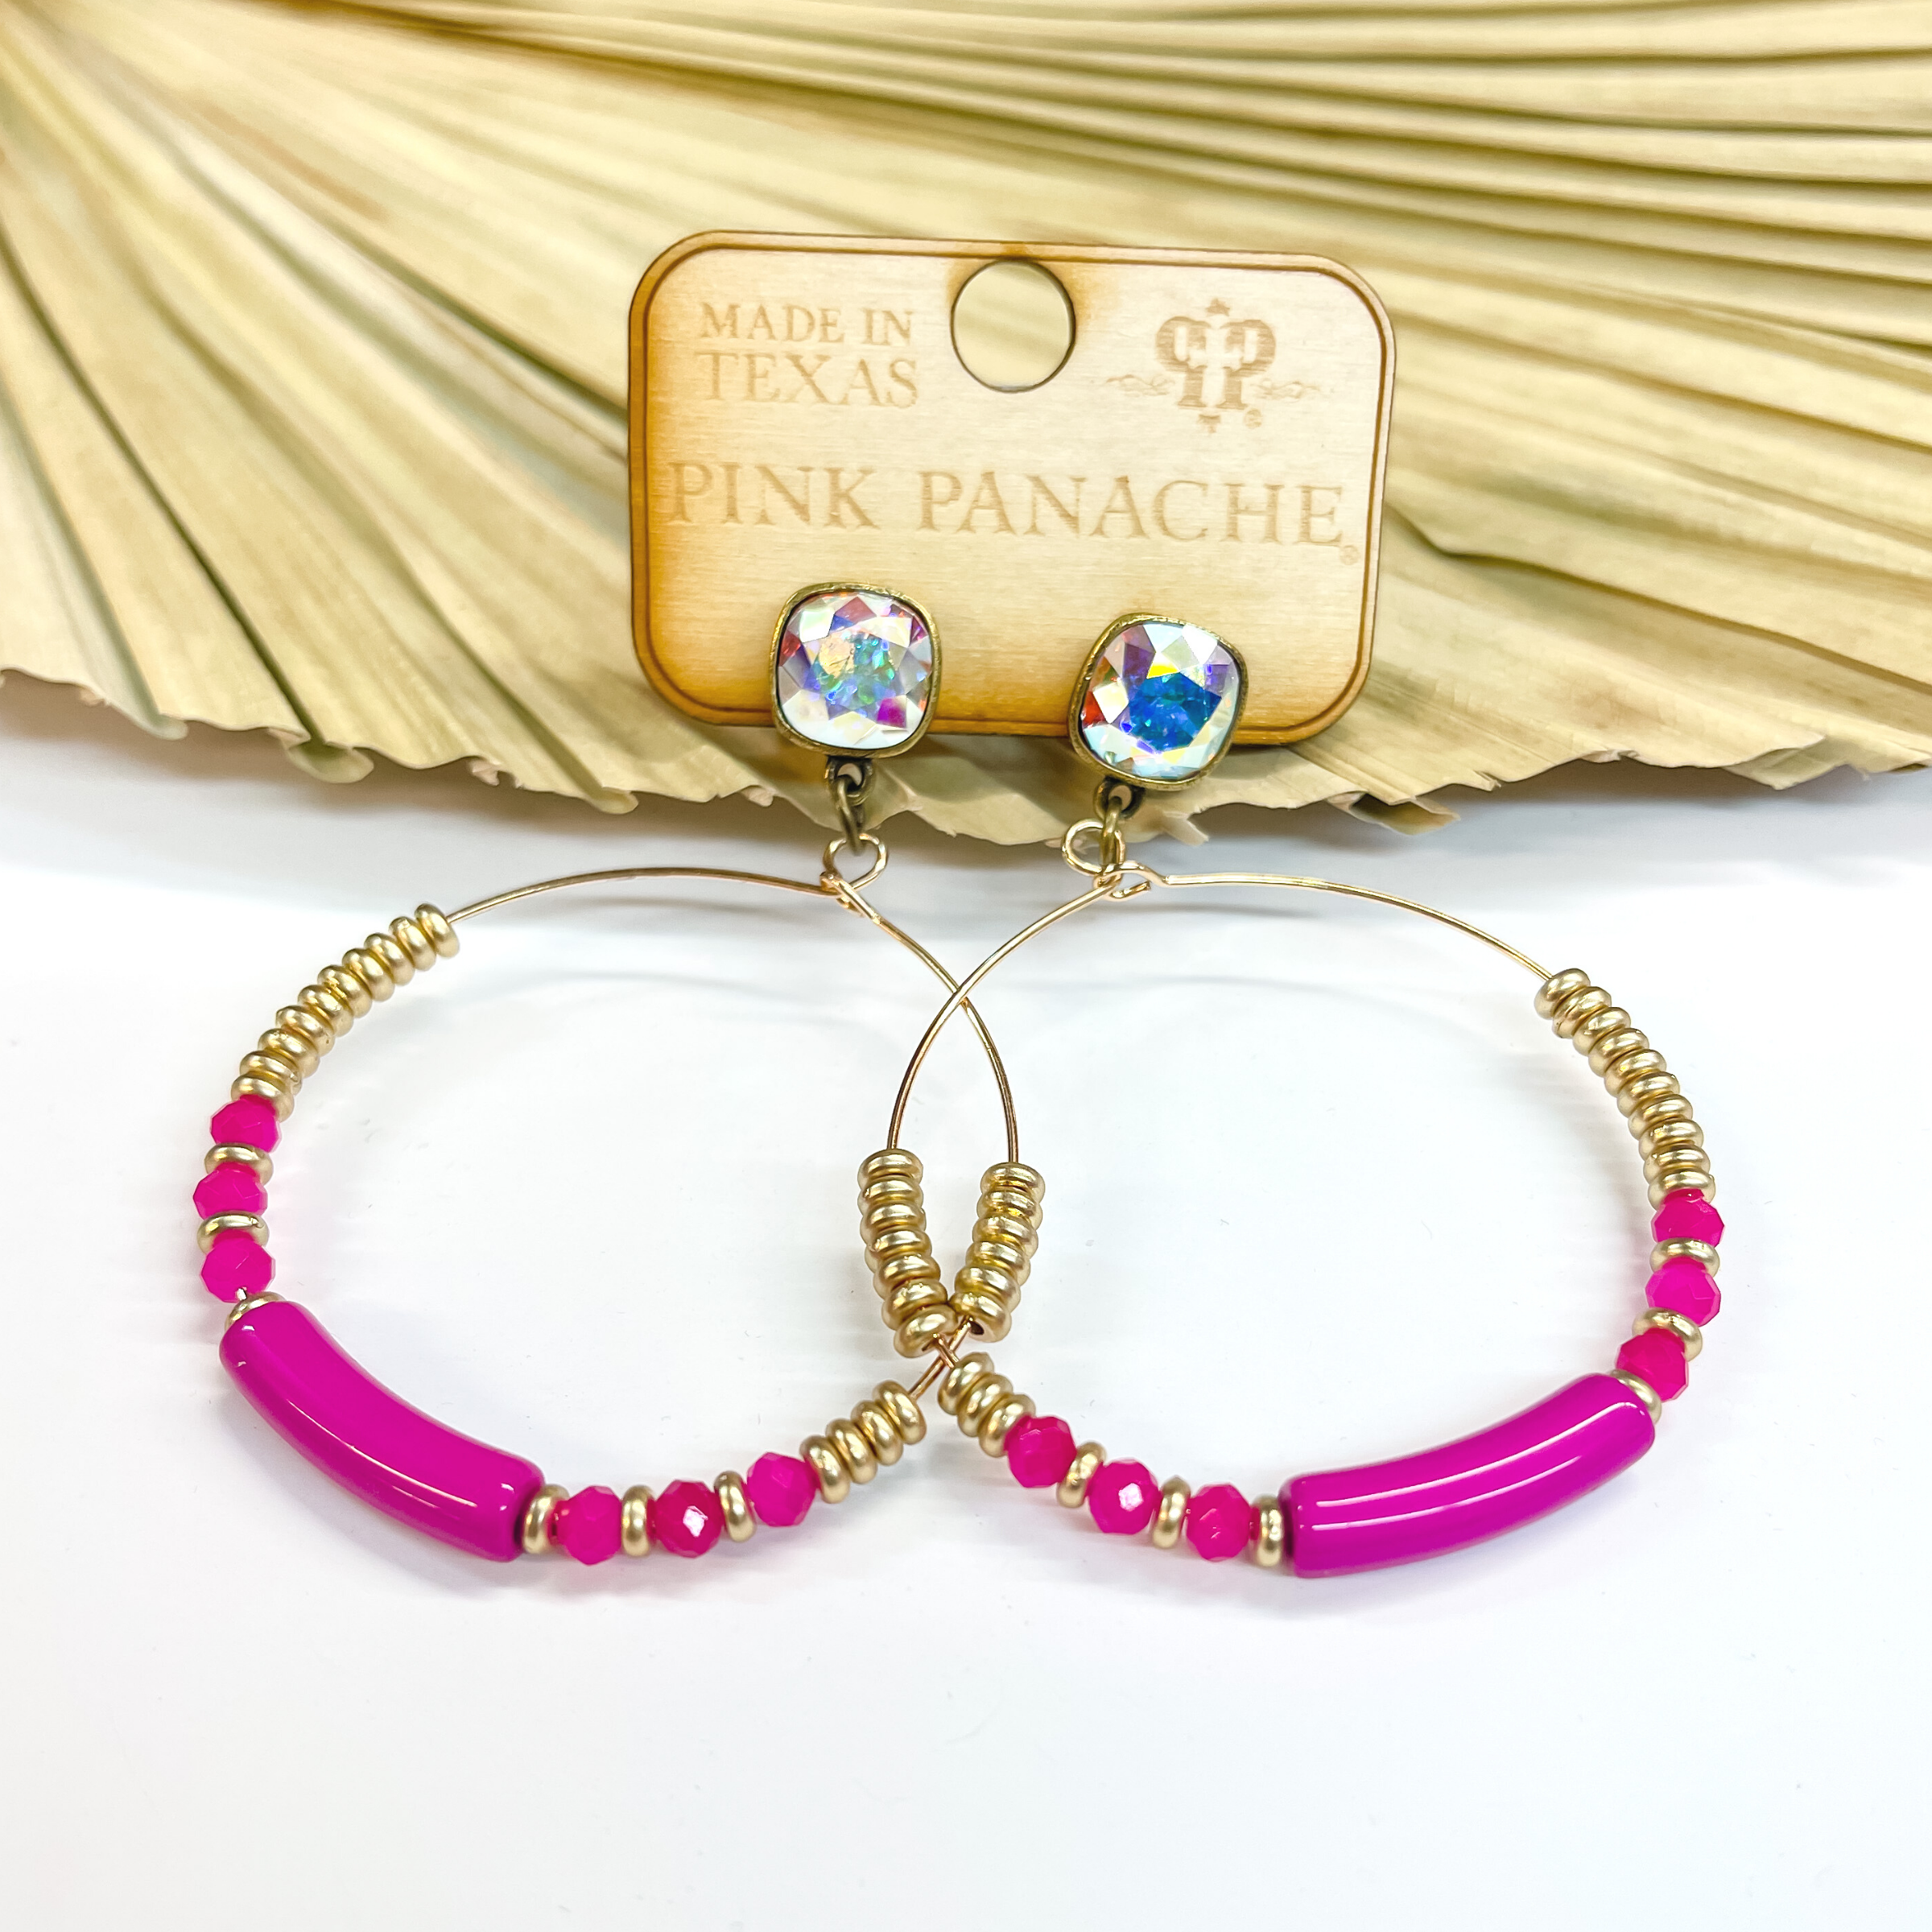 These are ab cushion cut studded earrings with a  gold circle drop. The hoop has a long fuchsia bead in  the center with matte gold beads and three fuchsia crystal beads on each side. They are taken on a white  background and leaned up against a dried up palm  leaf.